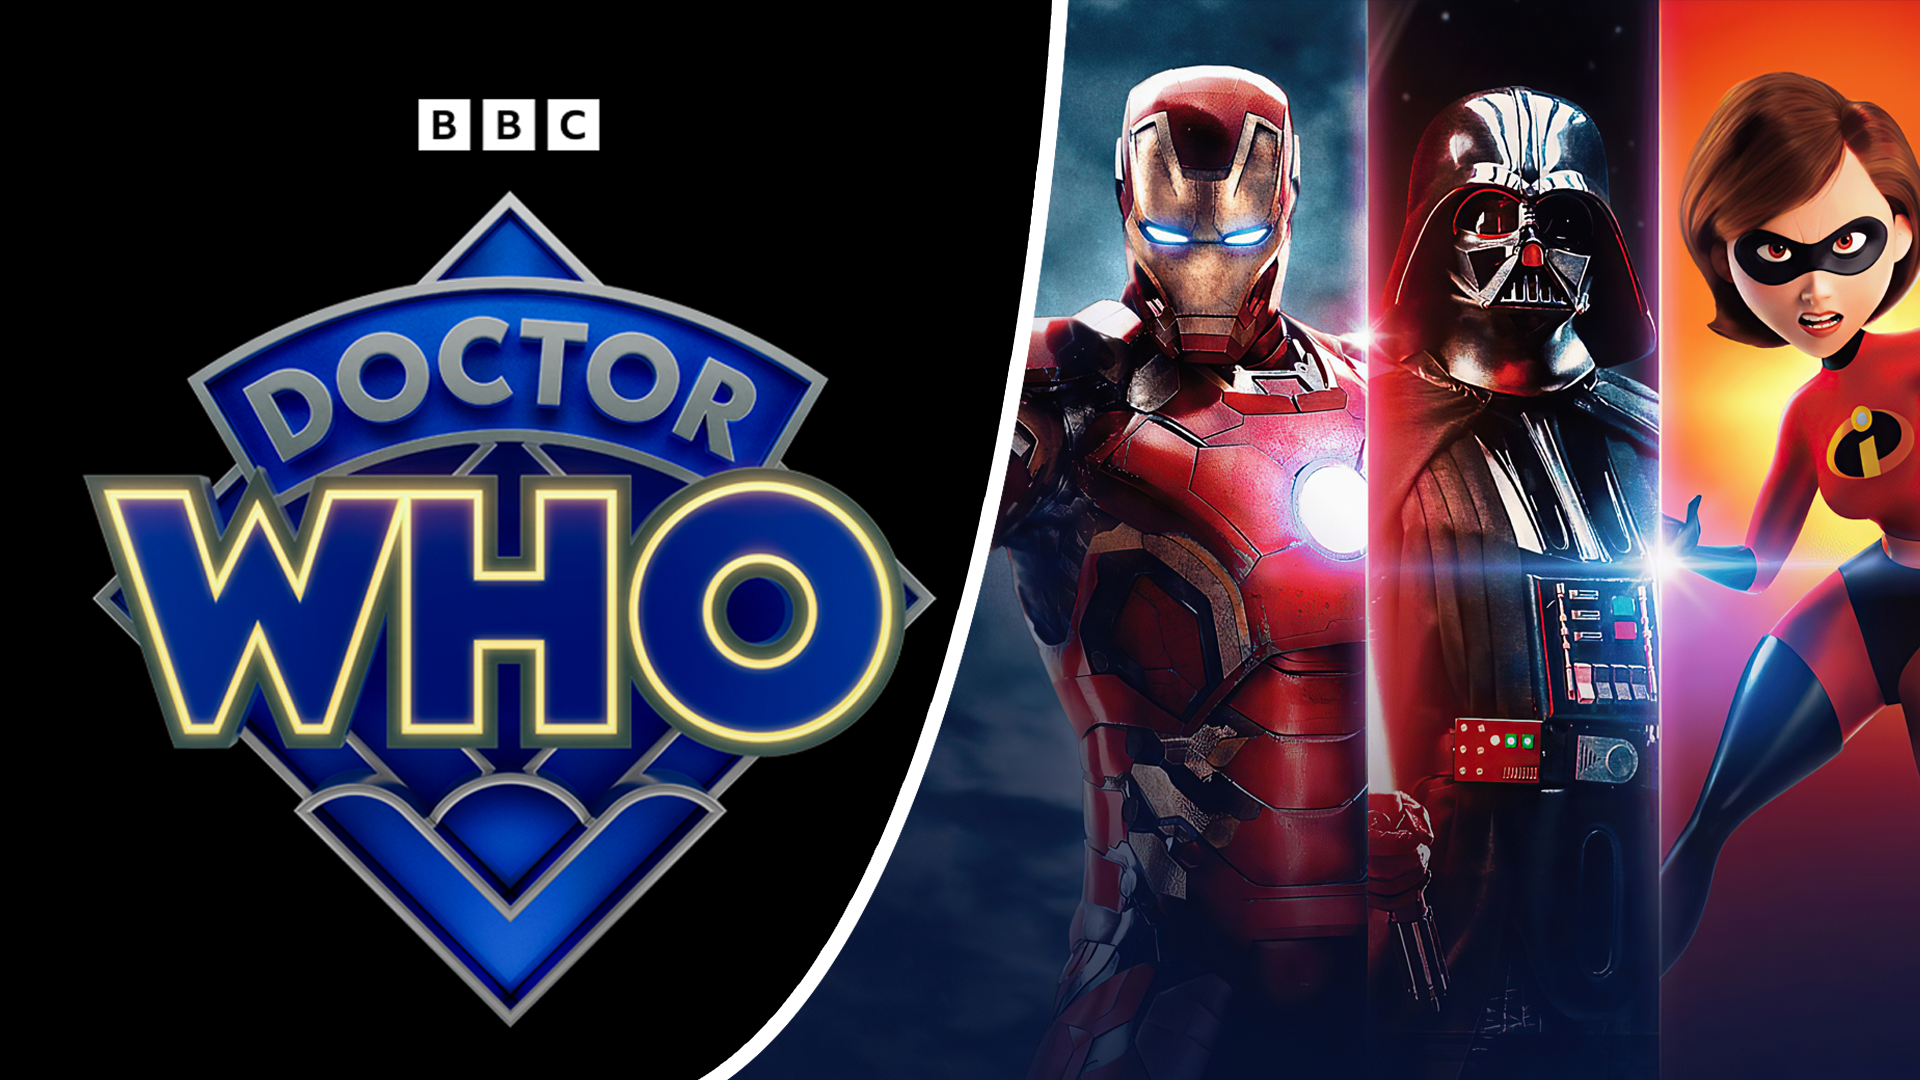 Disney+ To Become New Global Home for ‘Doctor Who’ Outside UK and Ireland